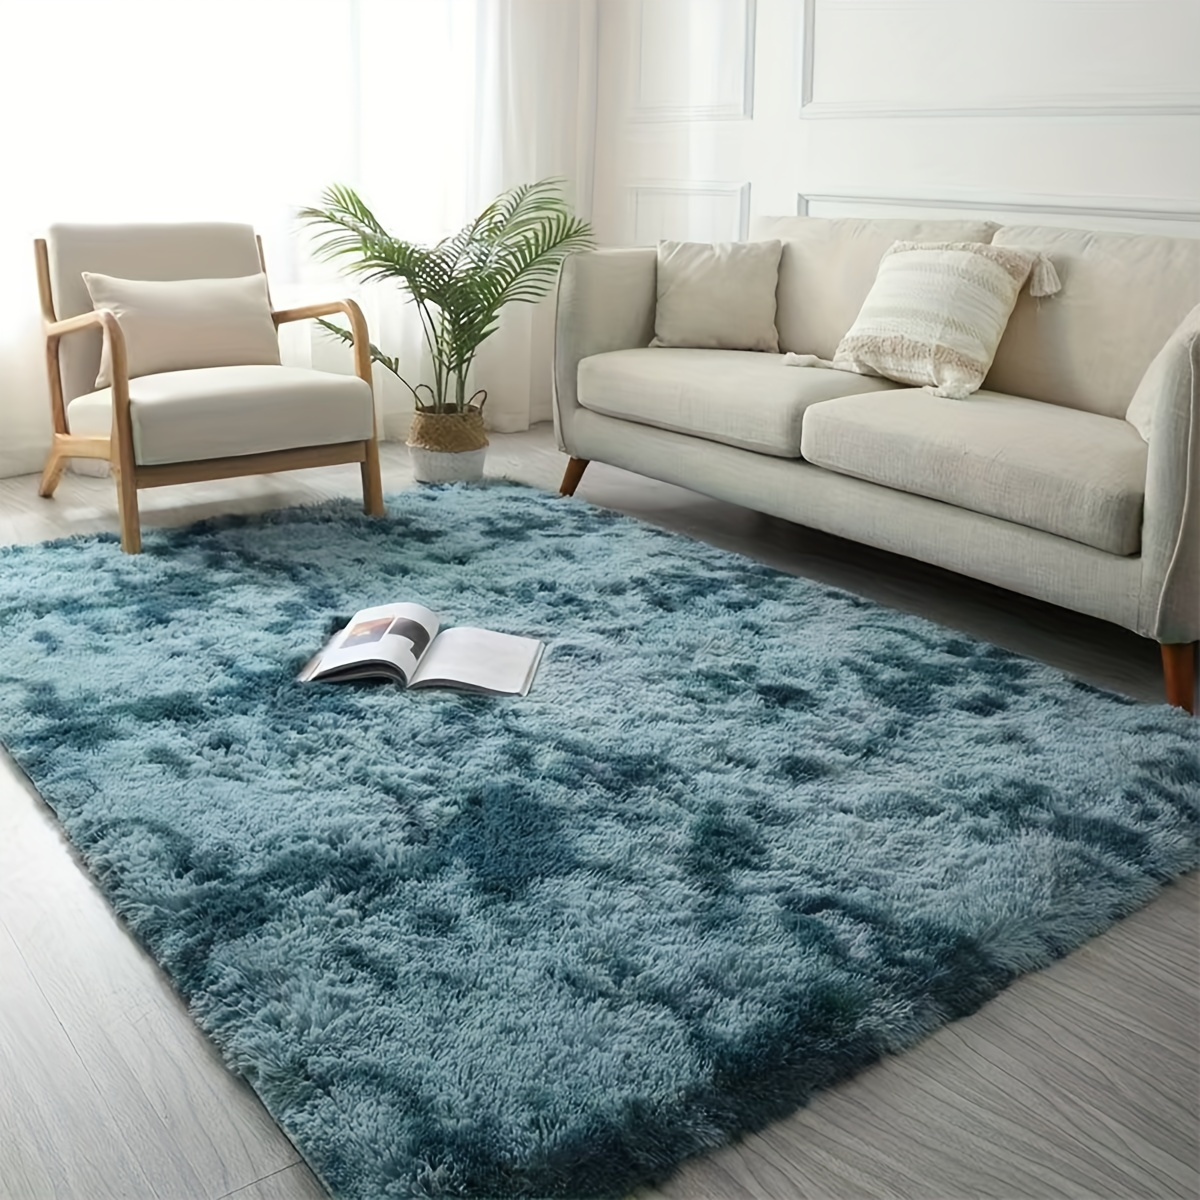 1pc Tie-Dyed Shag Area Rugs for Living Room and Bedroom - Soft and Fluffy Non-Slip Carpet for Home Decor - Washable and Durable - 62.99x90.55in